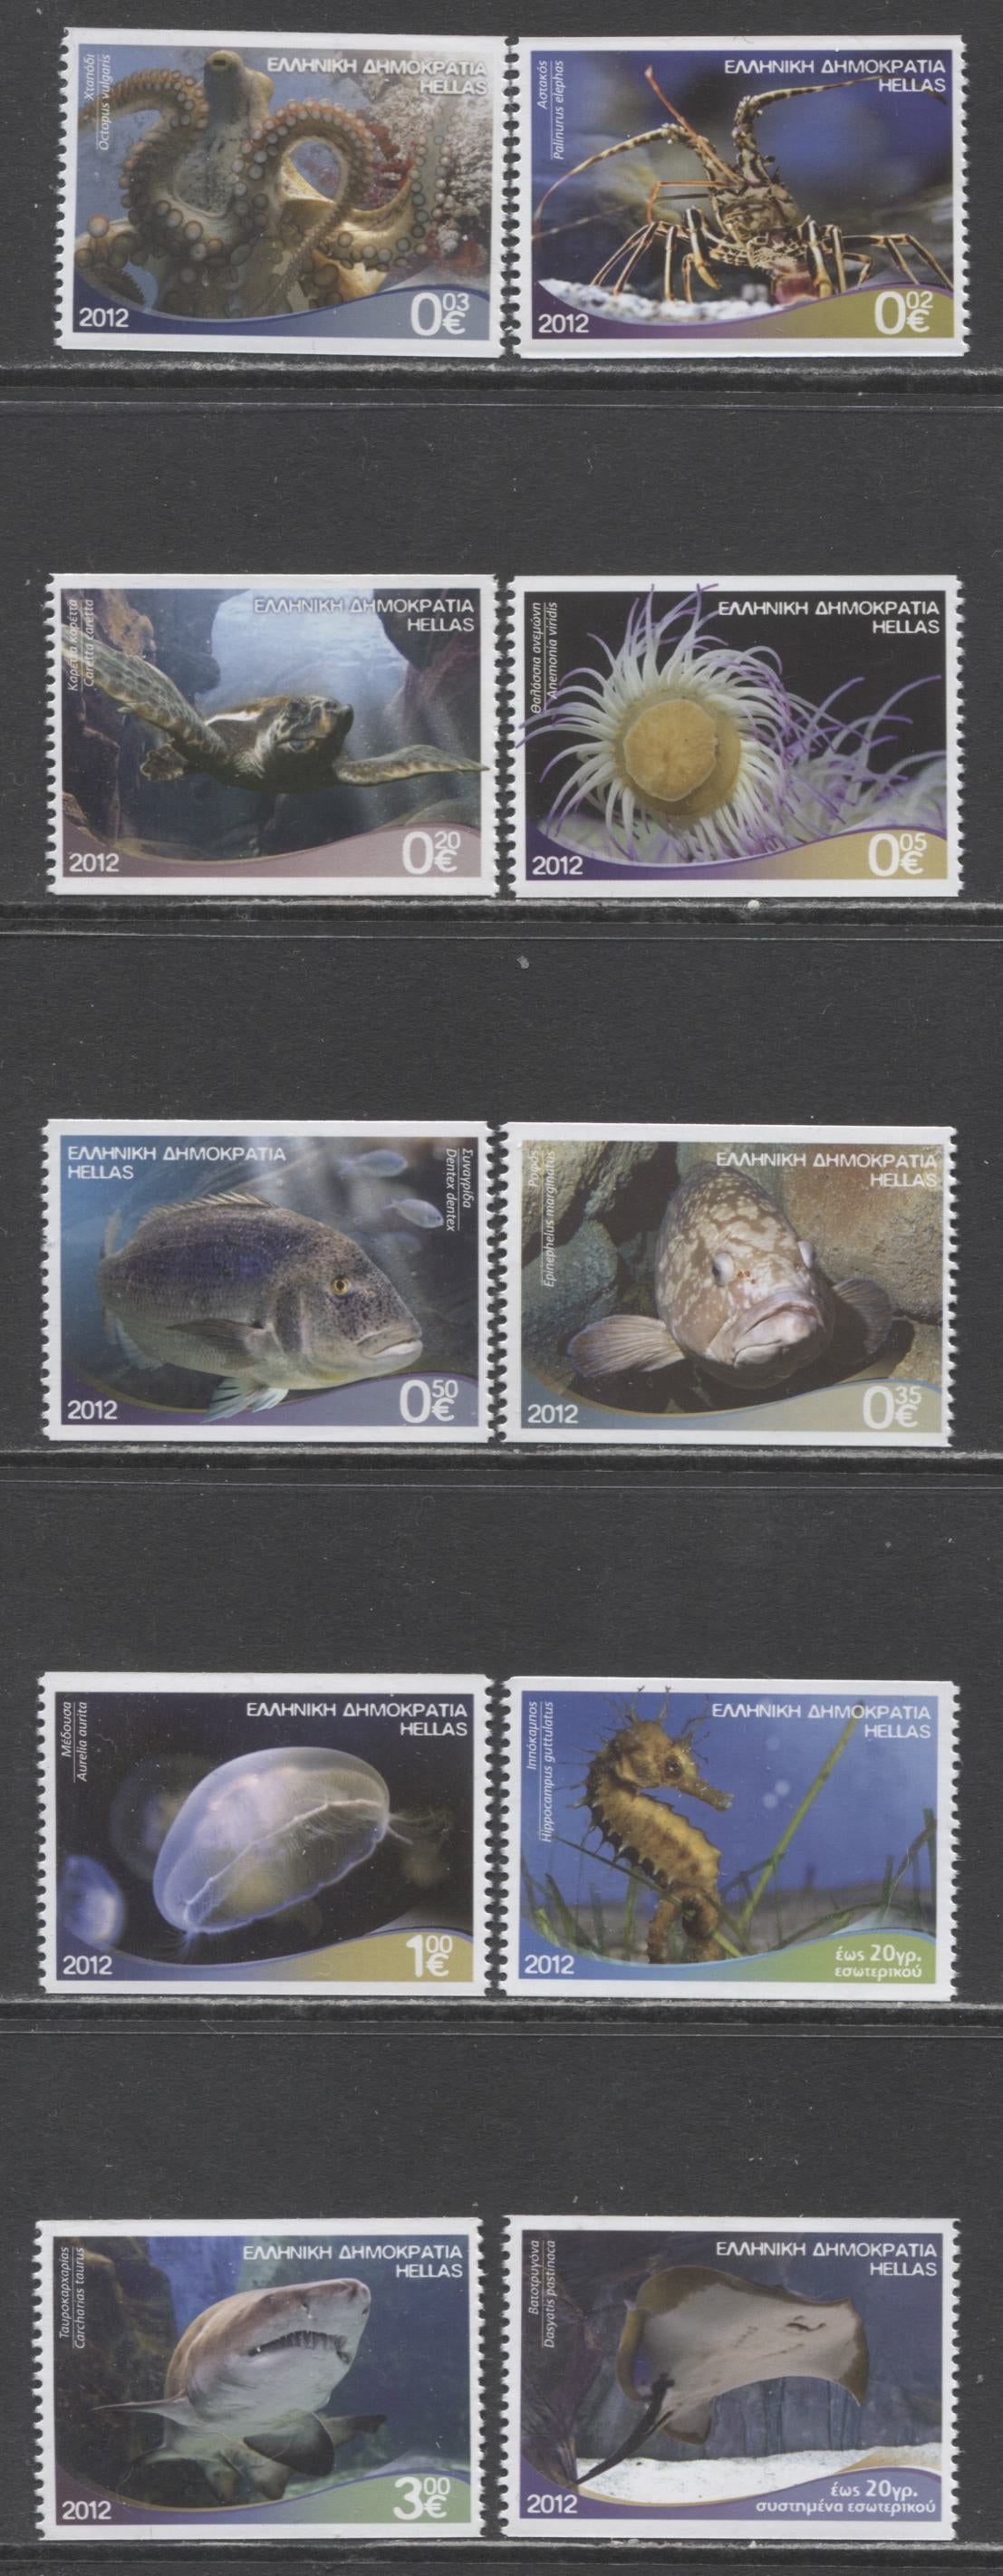 Lot 10 Greece SC#2519a-2528a 2012 Marine Life Issue, Perf 12.75x12 Vertical, 10 VFNH Singles, Click on Listing to See ALL Pictures, 2017 Scott Cat. $22.35